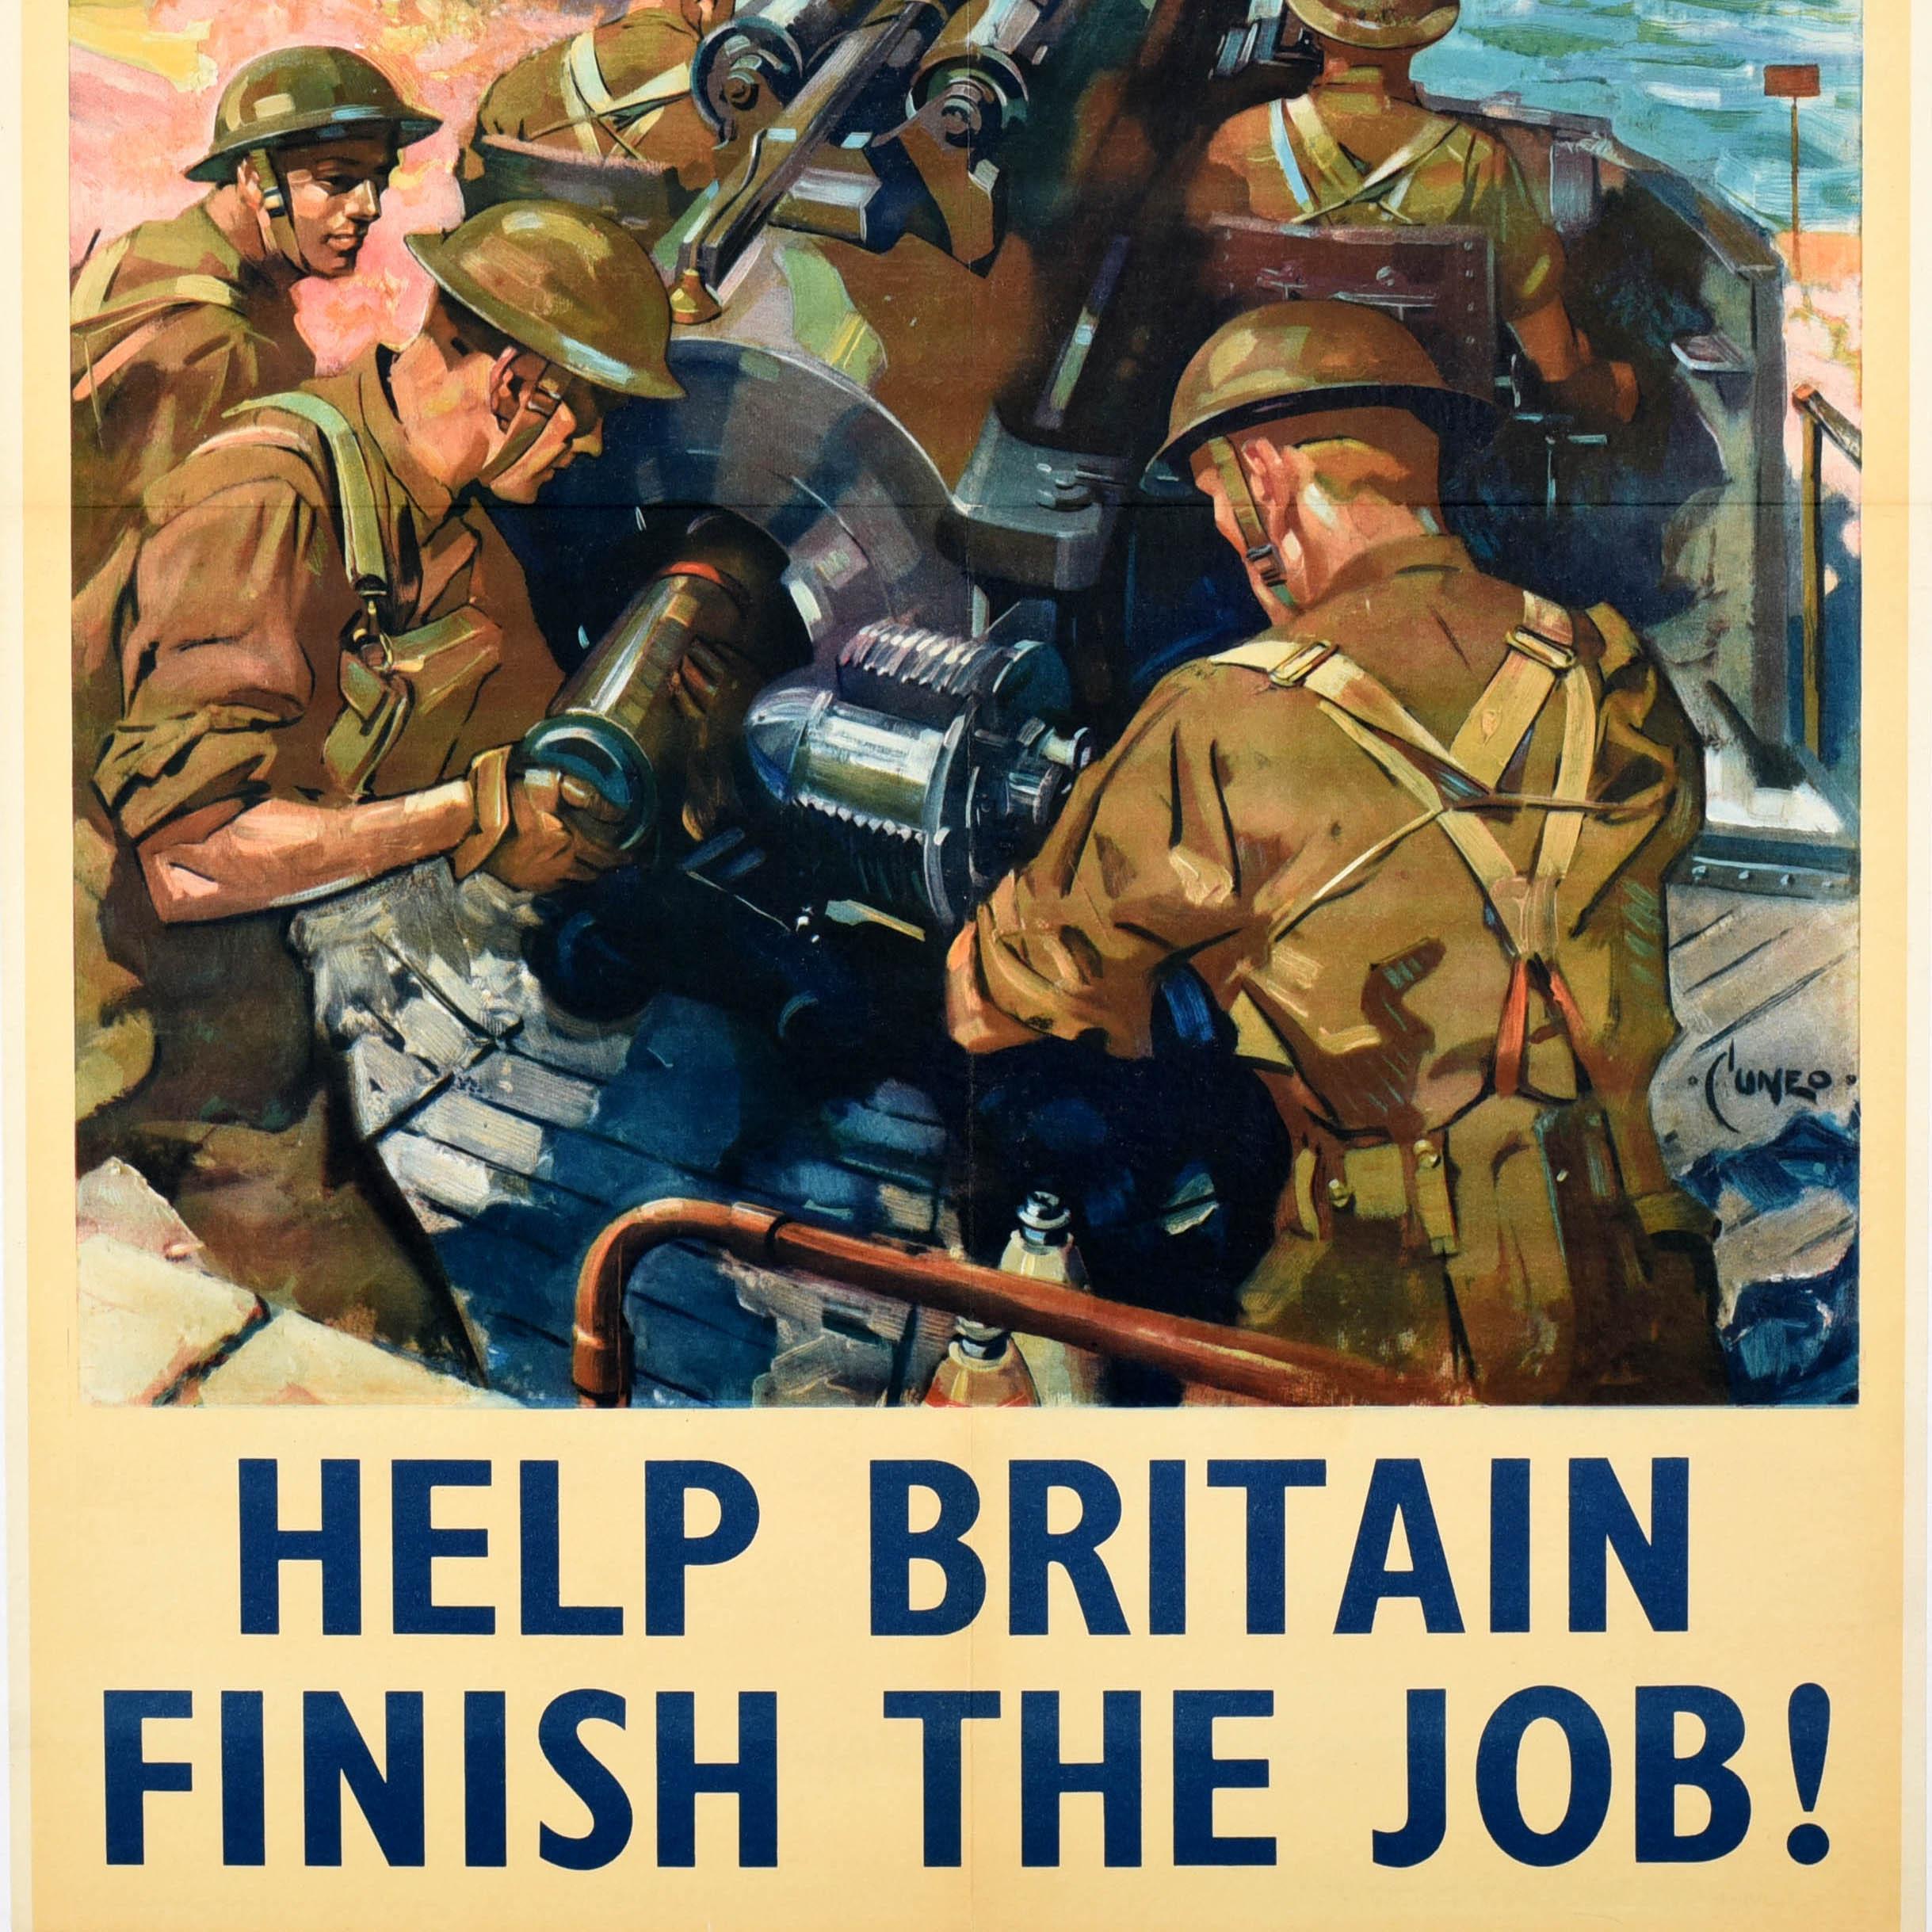 Original Vintage War Propaganda Poster Help Britain Finish The Job WWII Cuneo In Good Condition For Sale In London, GB